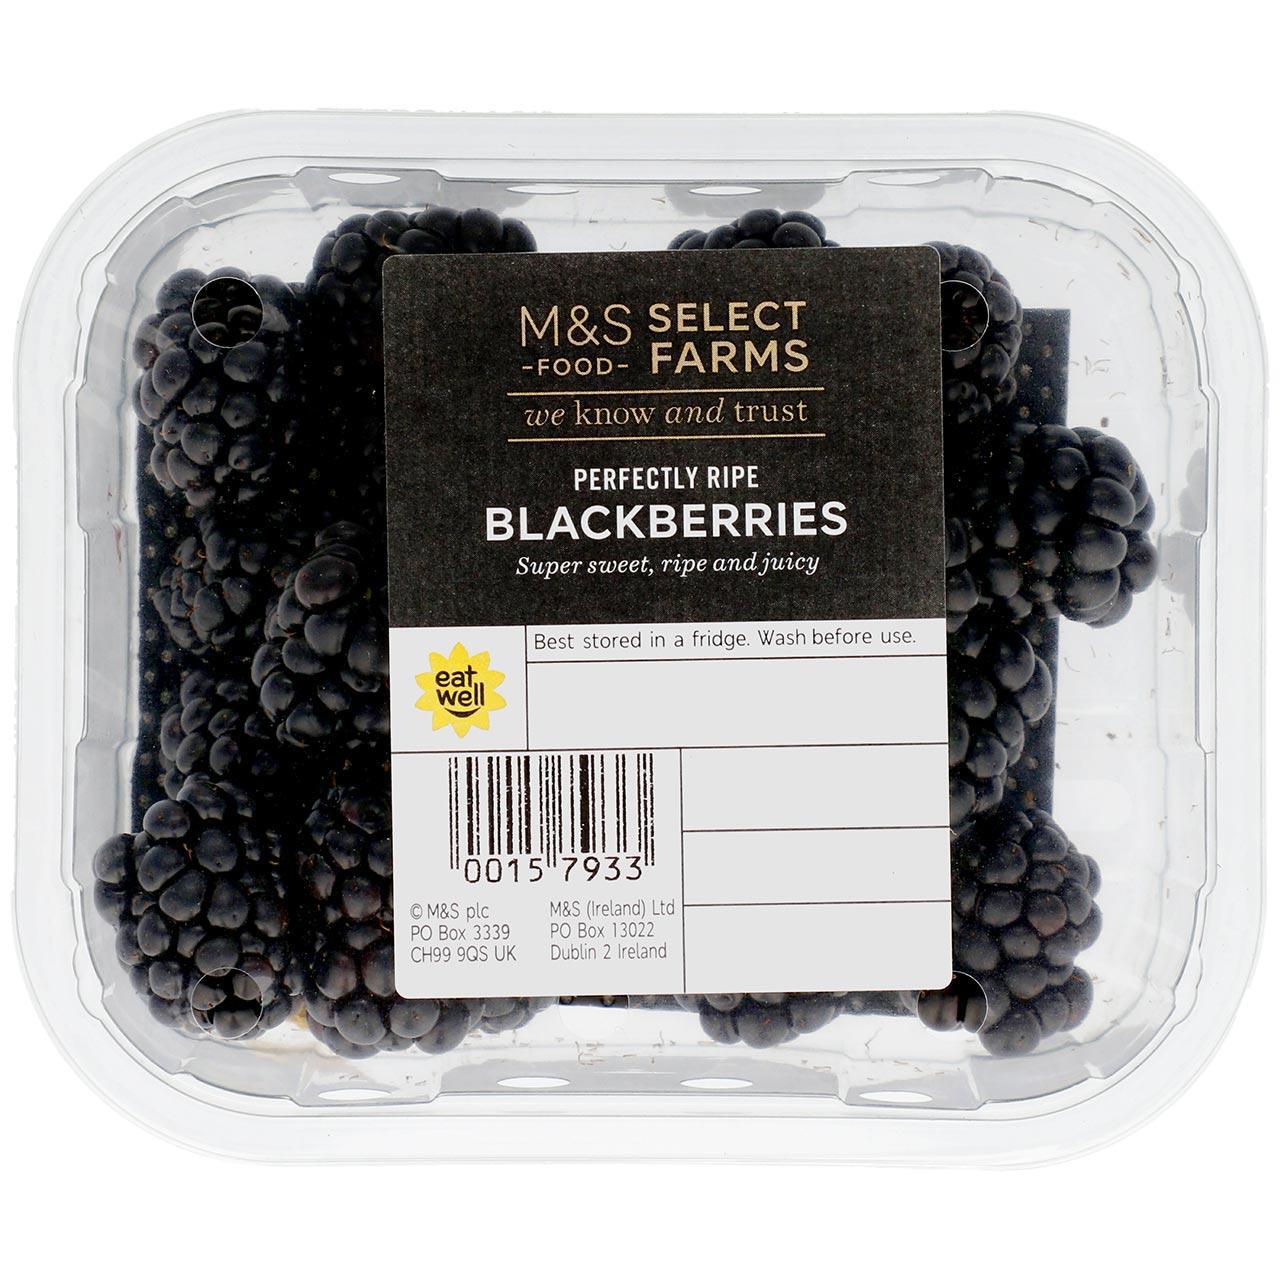 M&S Select Farms Blackberries Perfectly Ripe 300g